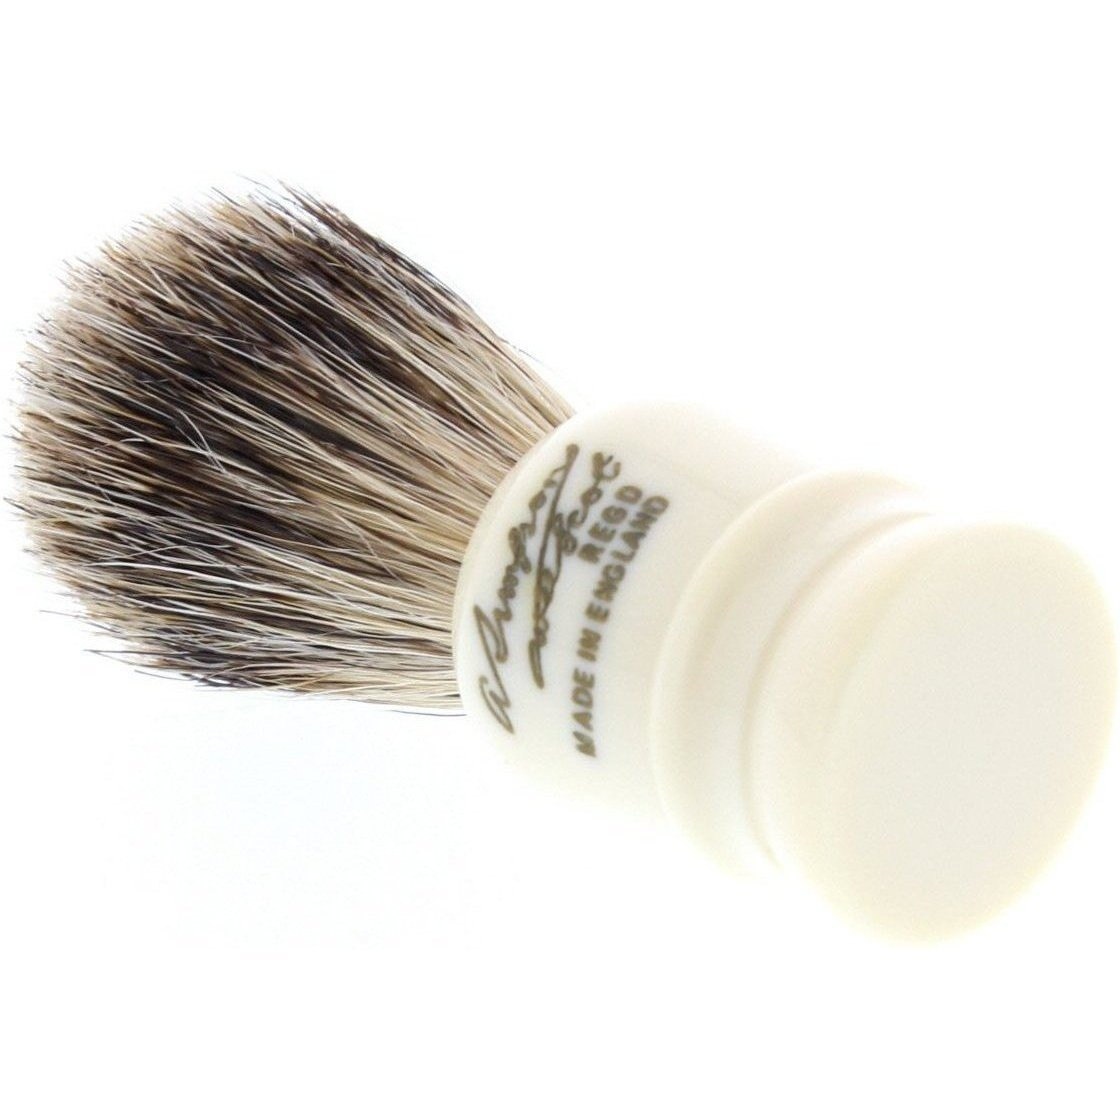 Product image 3 for Simpson Wee Scot Best Badger Shaving Brush